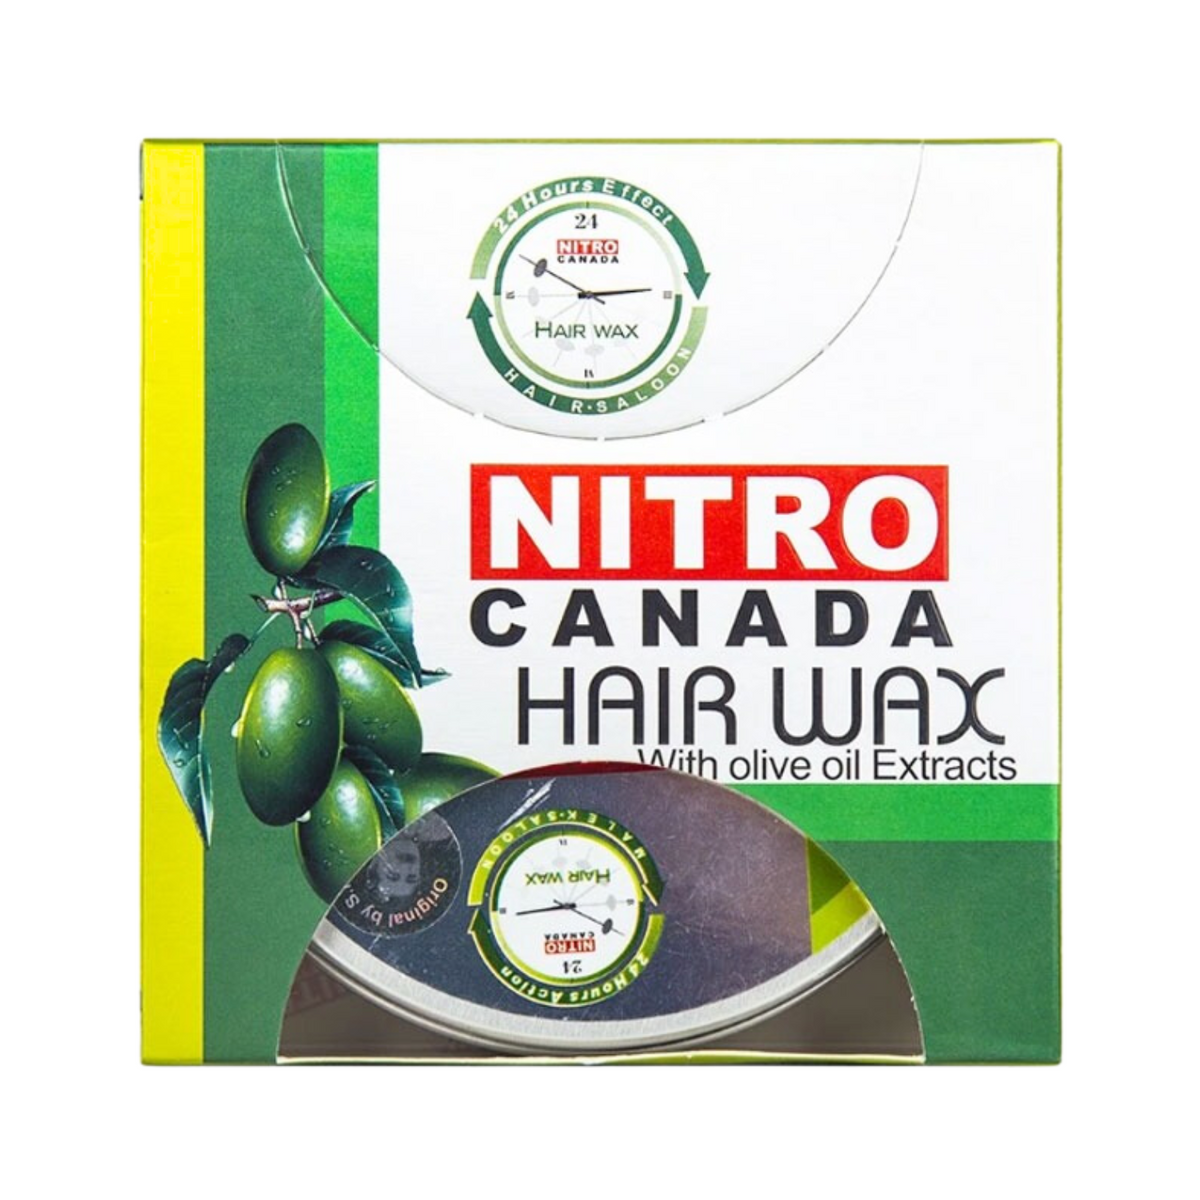 nitro-canada-hair-wax-olive-oil-extracts-150g